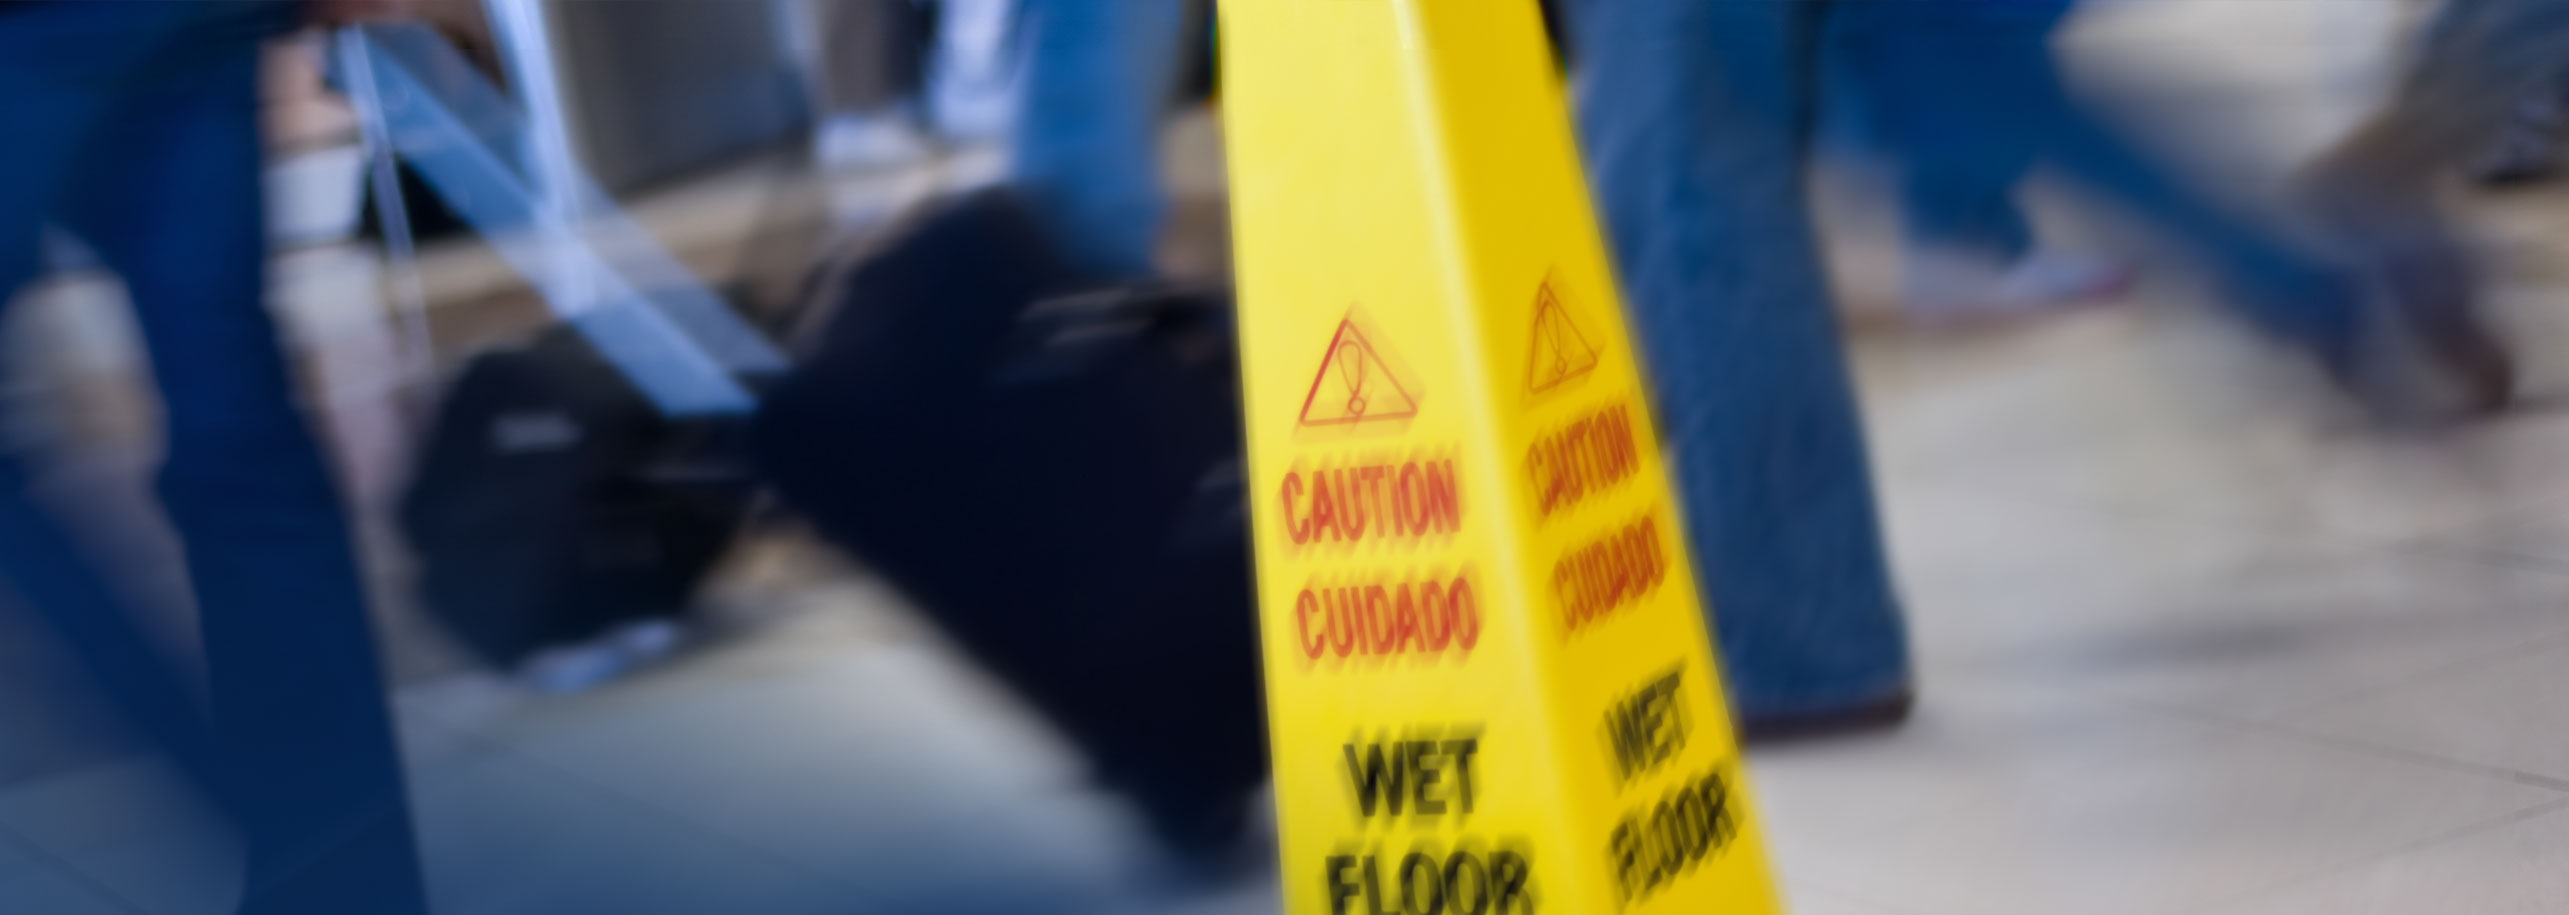 Wet floor sign with people walking by